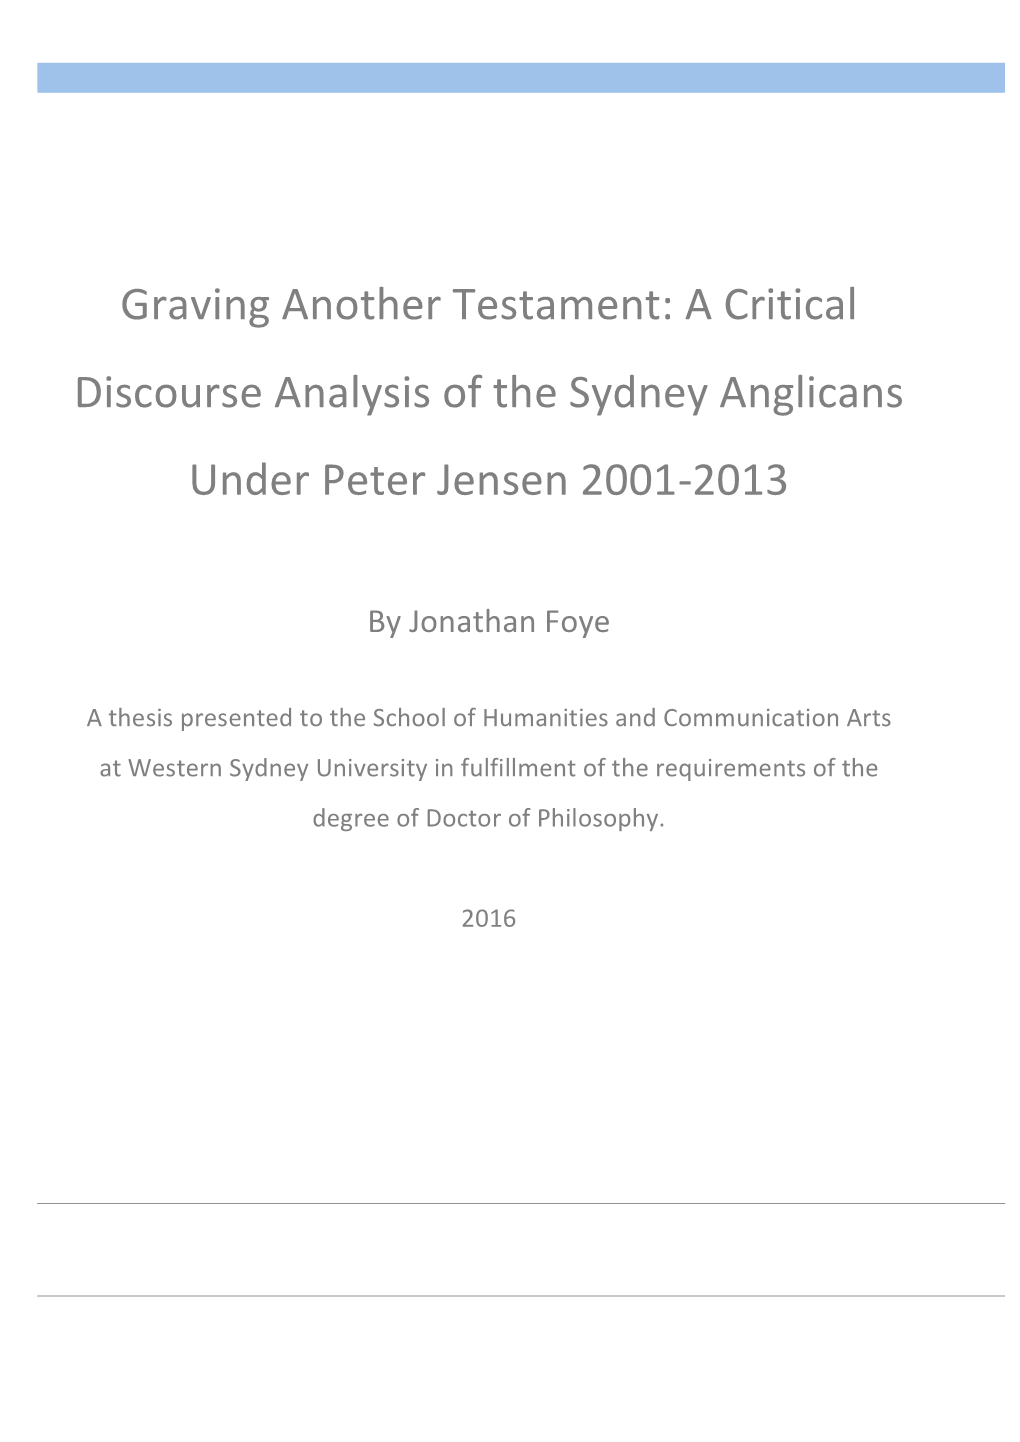 Graving Another Testament: a Critical Discourse Analysis of the Sydney Anglicans Under Peter Jensen 2001-2013